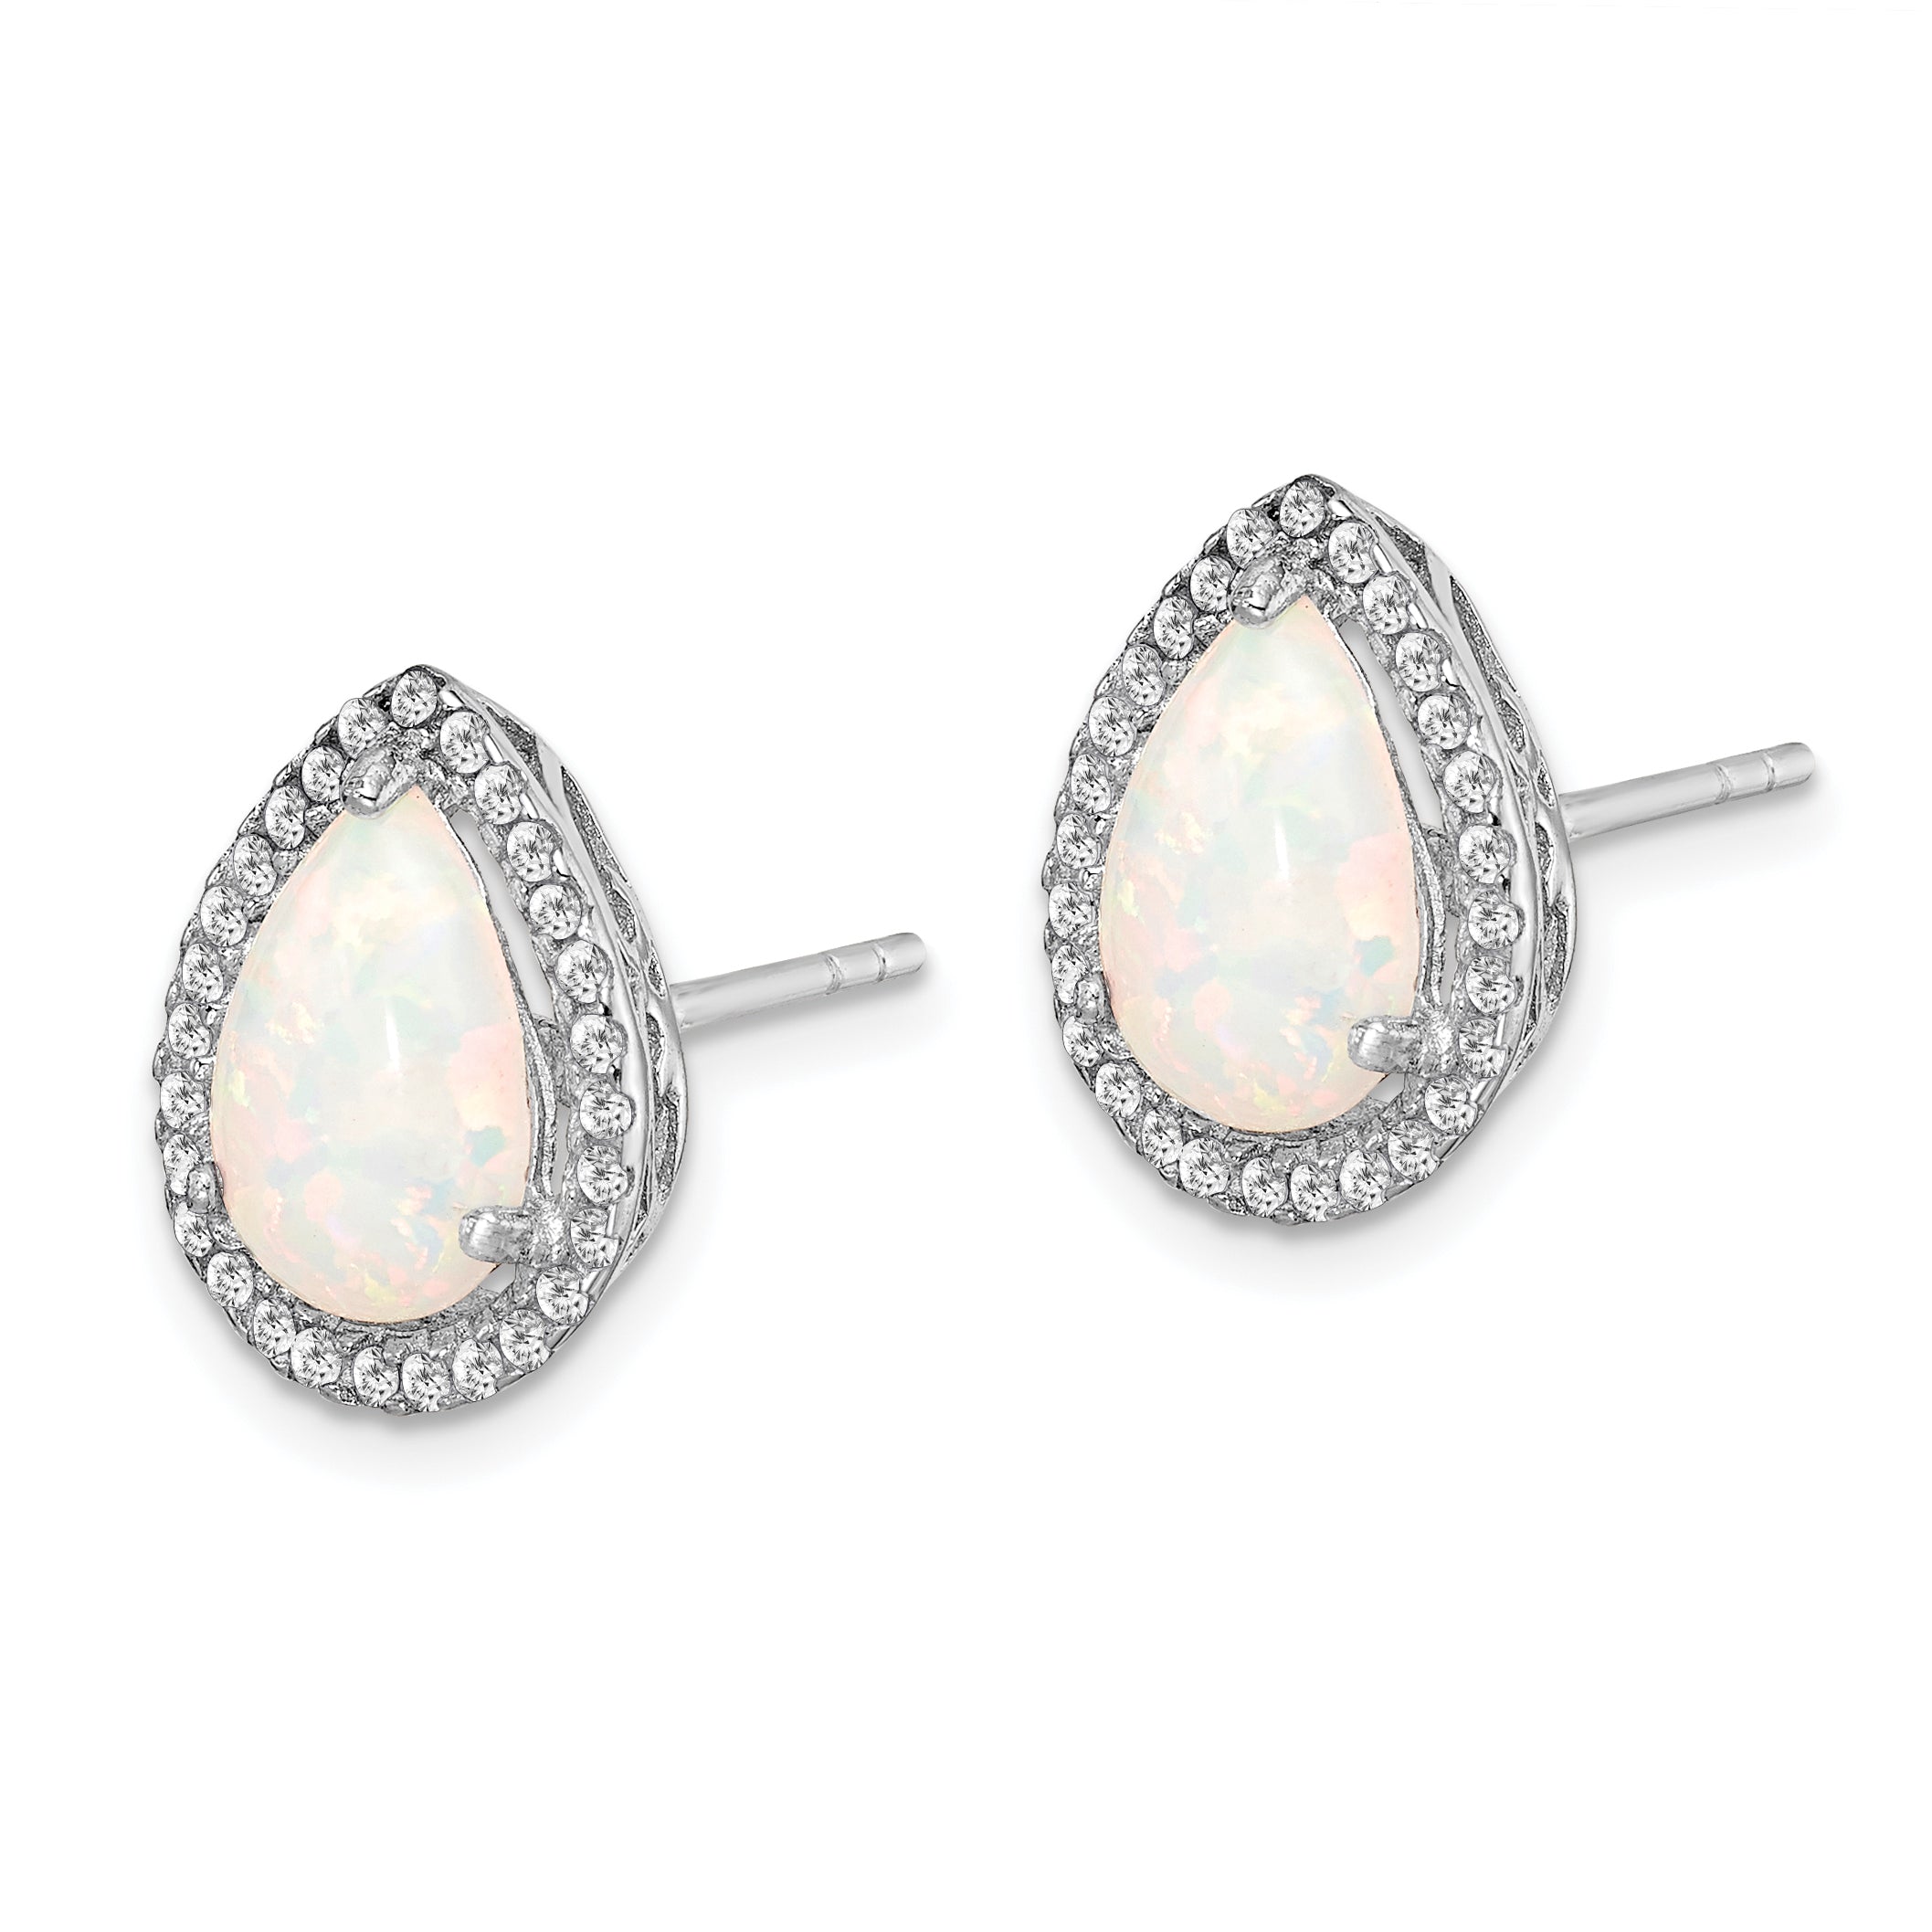 Sterling Silver Rhodium Polished Simulated Opal & CZ Post Earrings